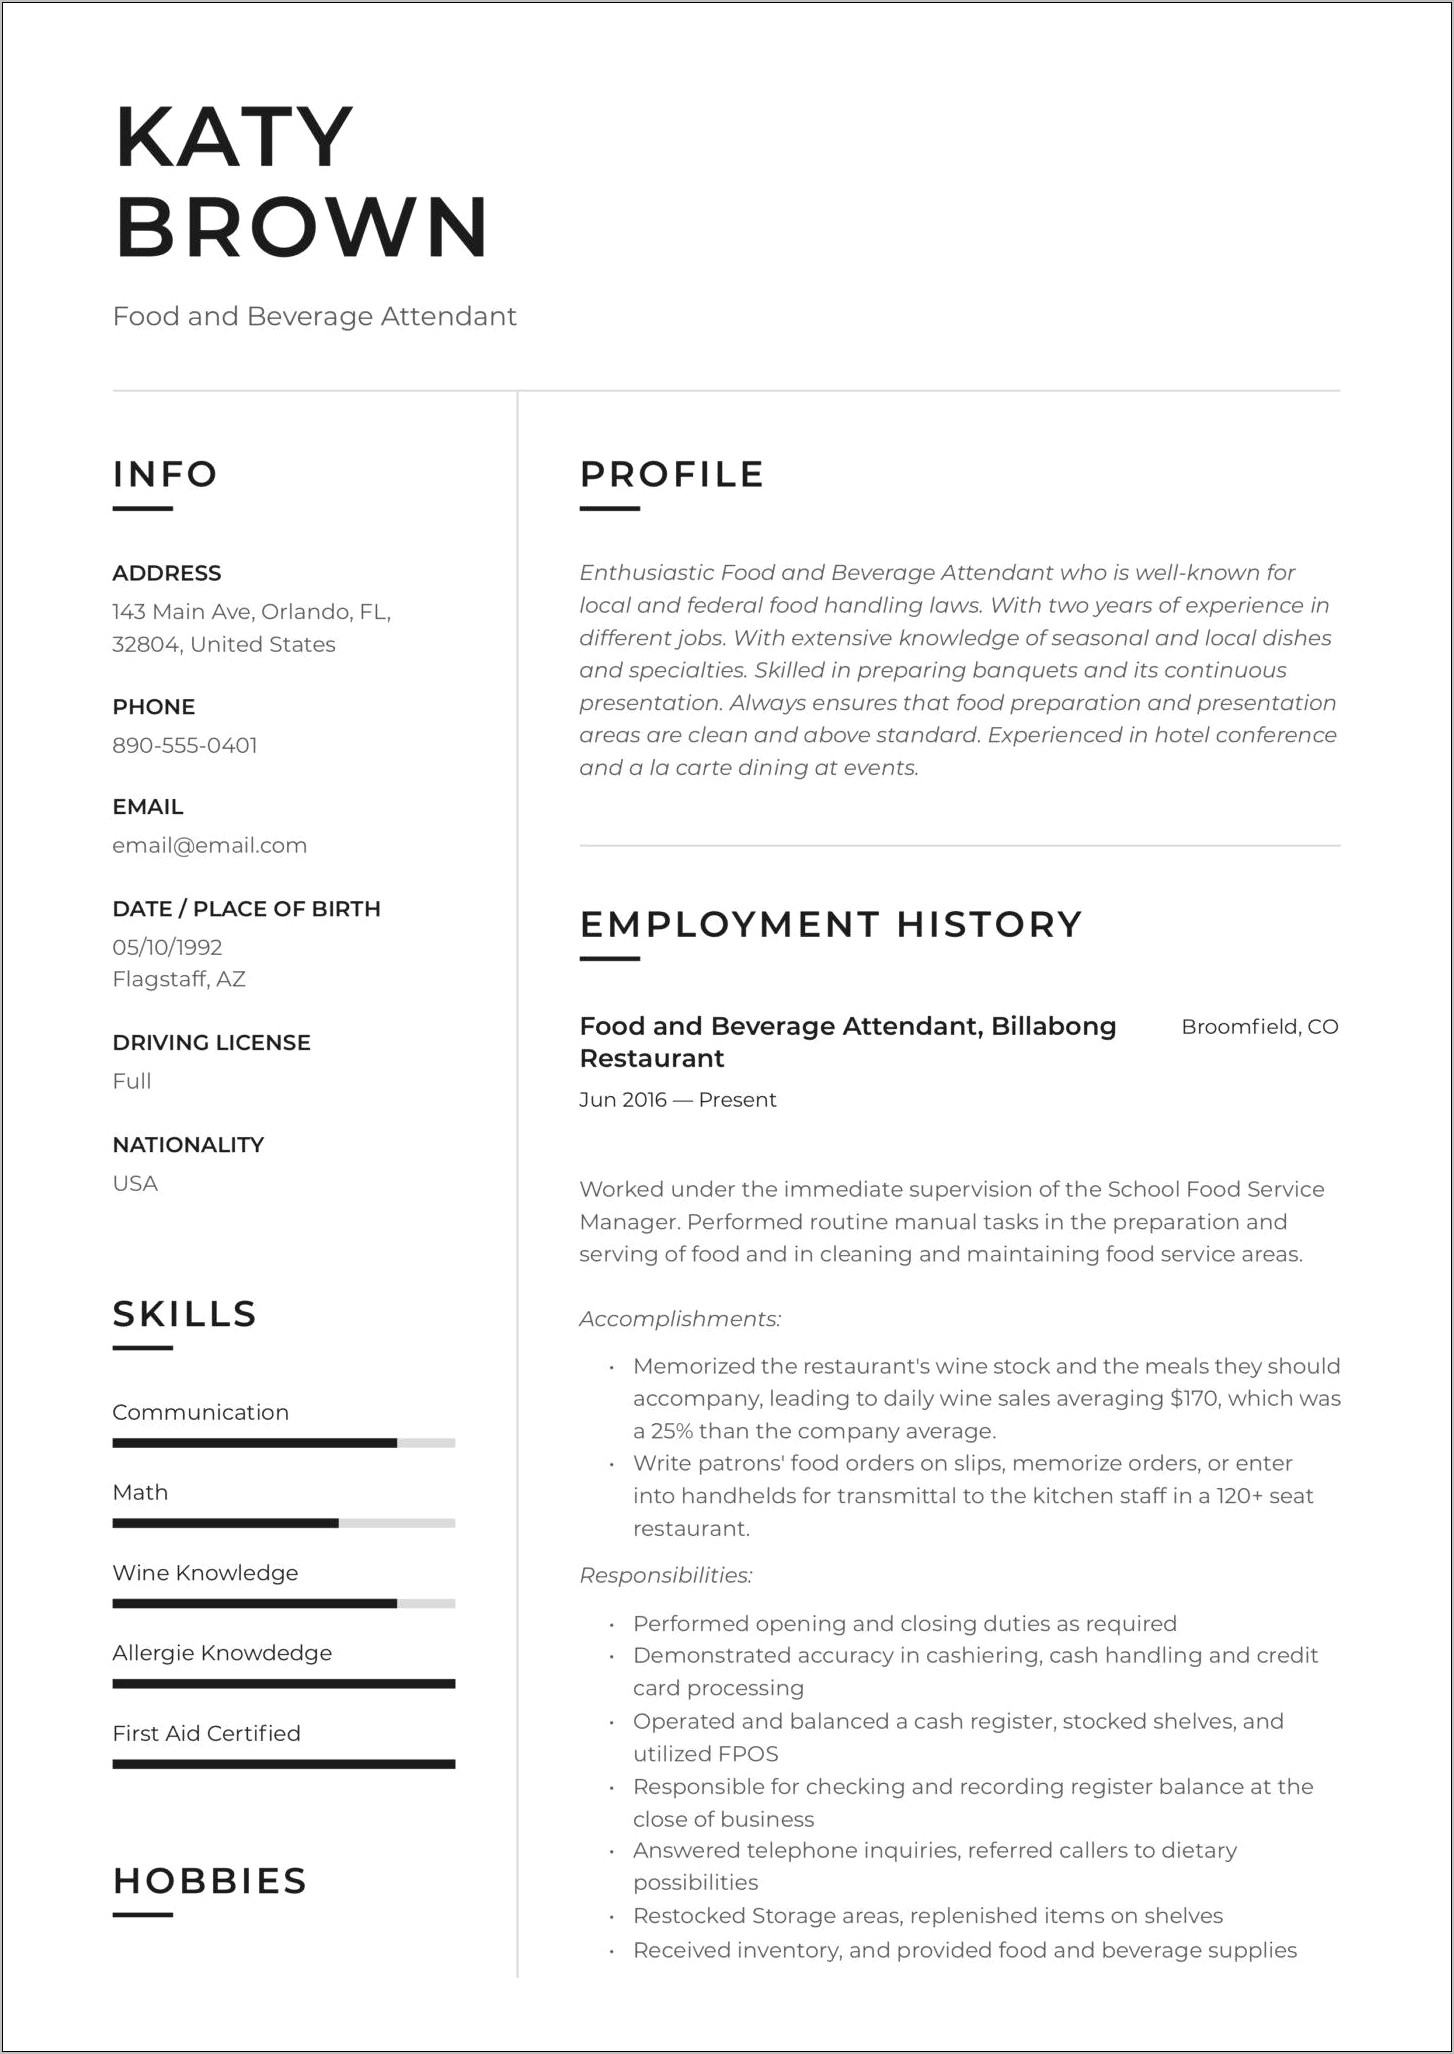 Resume Objectives For Hospitality Professionals